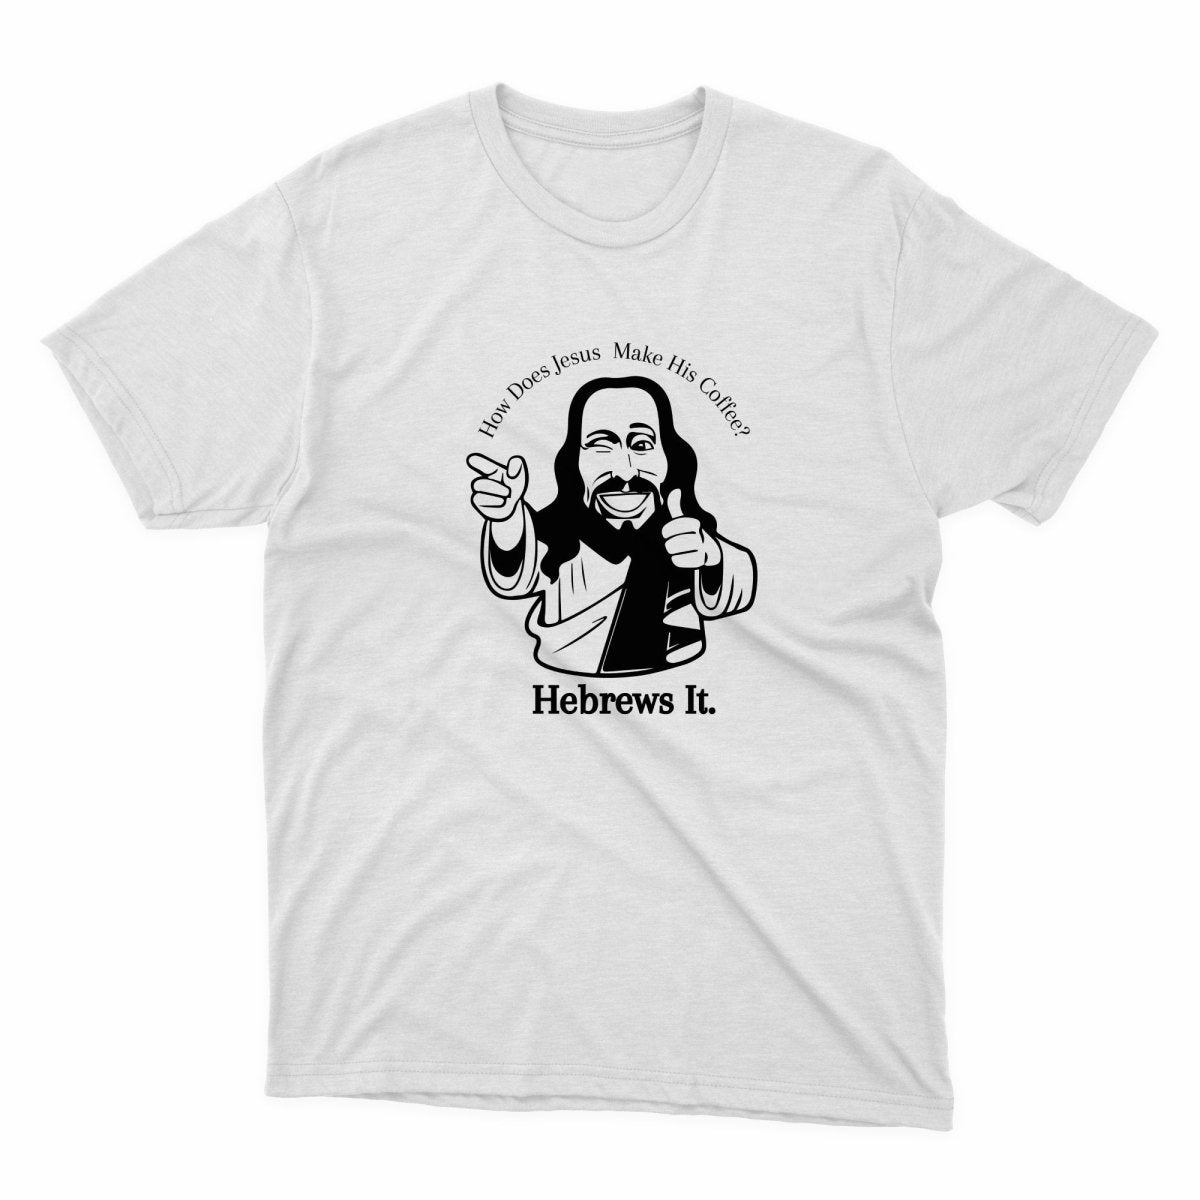 Jesus Hebrews It Shirt - stickerbullJesus Hebrews It ShirtShirtsPrintifystickerbull37441291619651972654WhiteSa white t - shirt with a black and white image of a man holding a